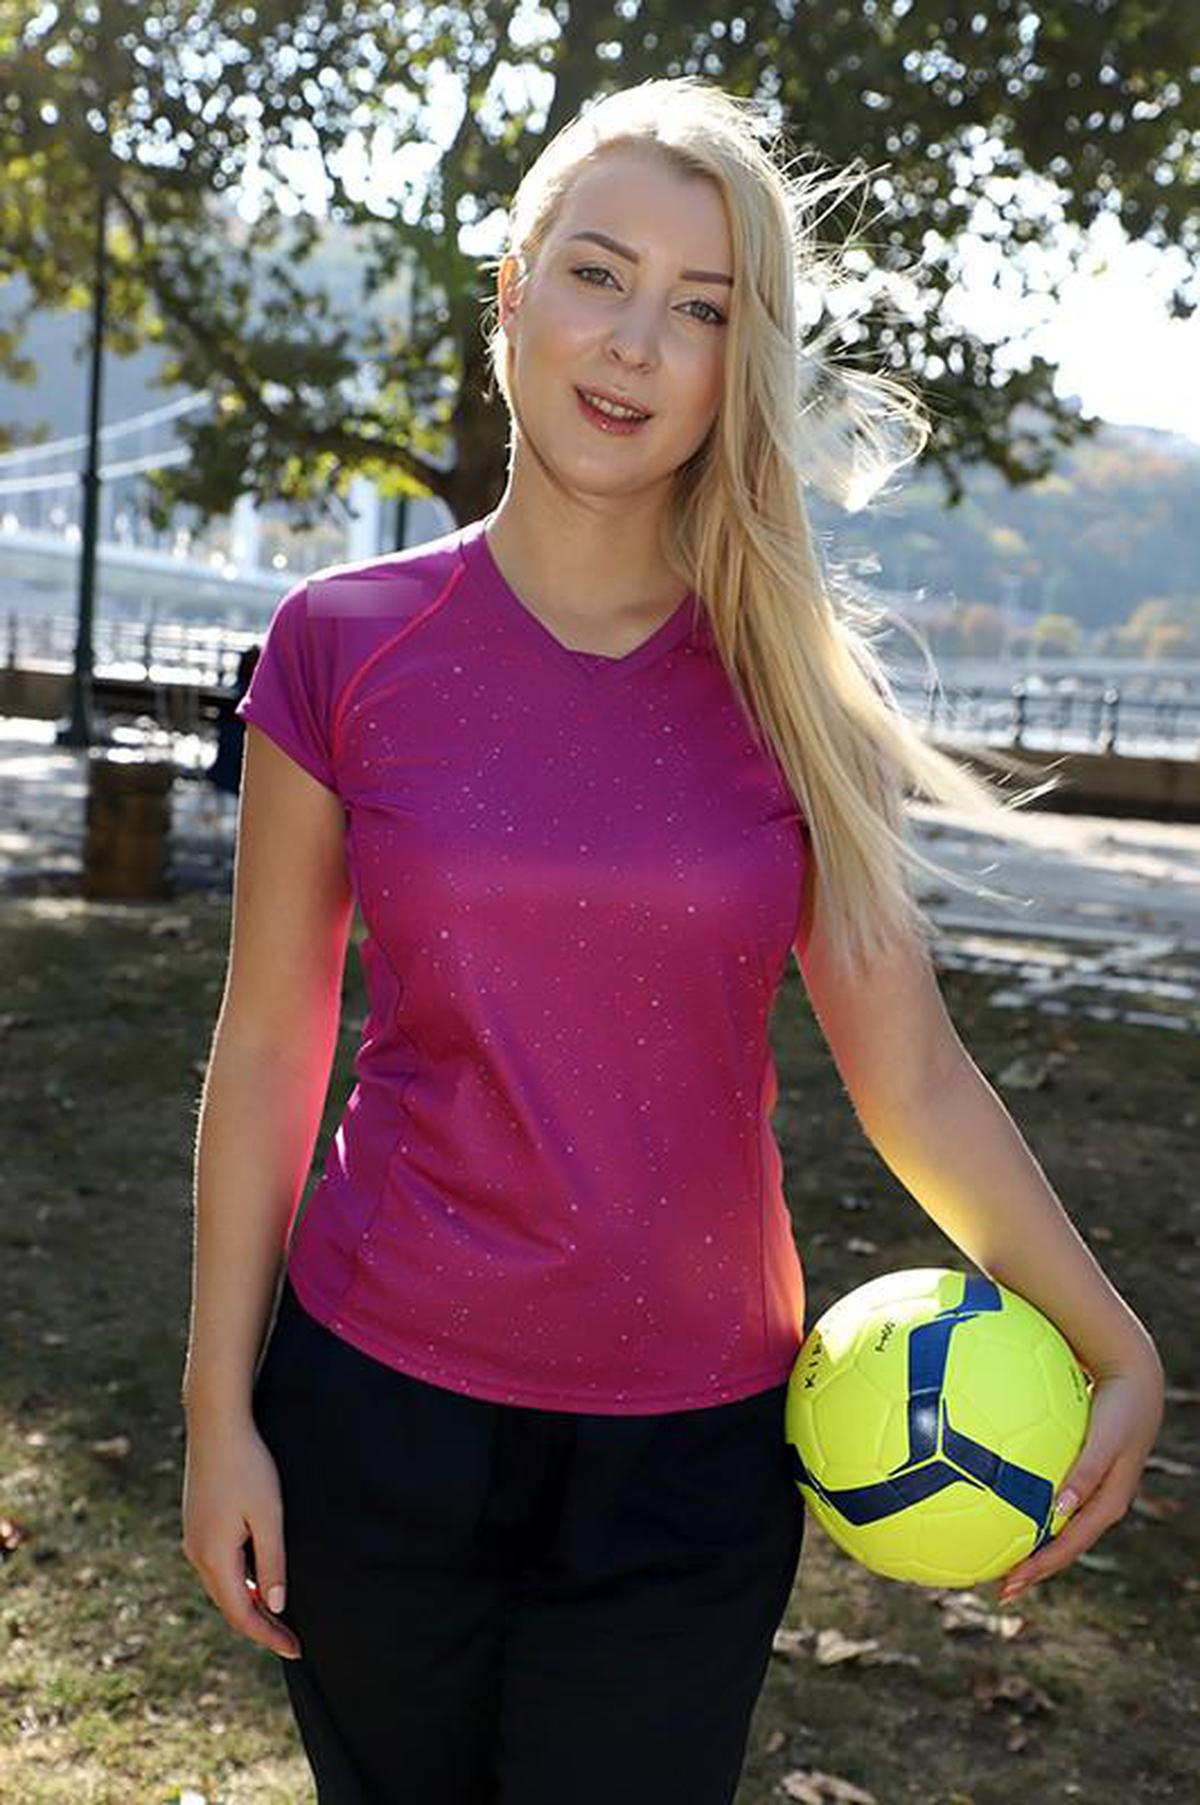 HUSR-228 The Transcendental Big Tits Beauty Found In Hungary Is An Active Volleyball Player! Desperately bite into the ball even on the night coat! AV release of the first sex with Japanese as it is!